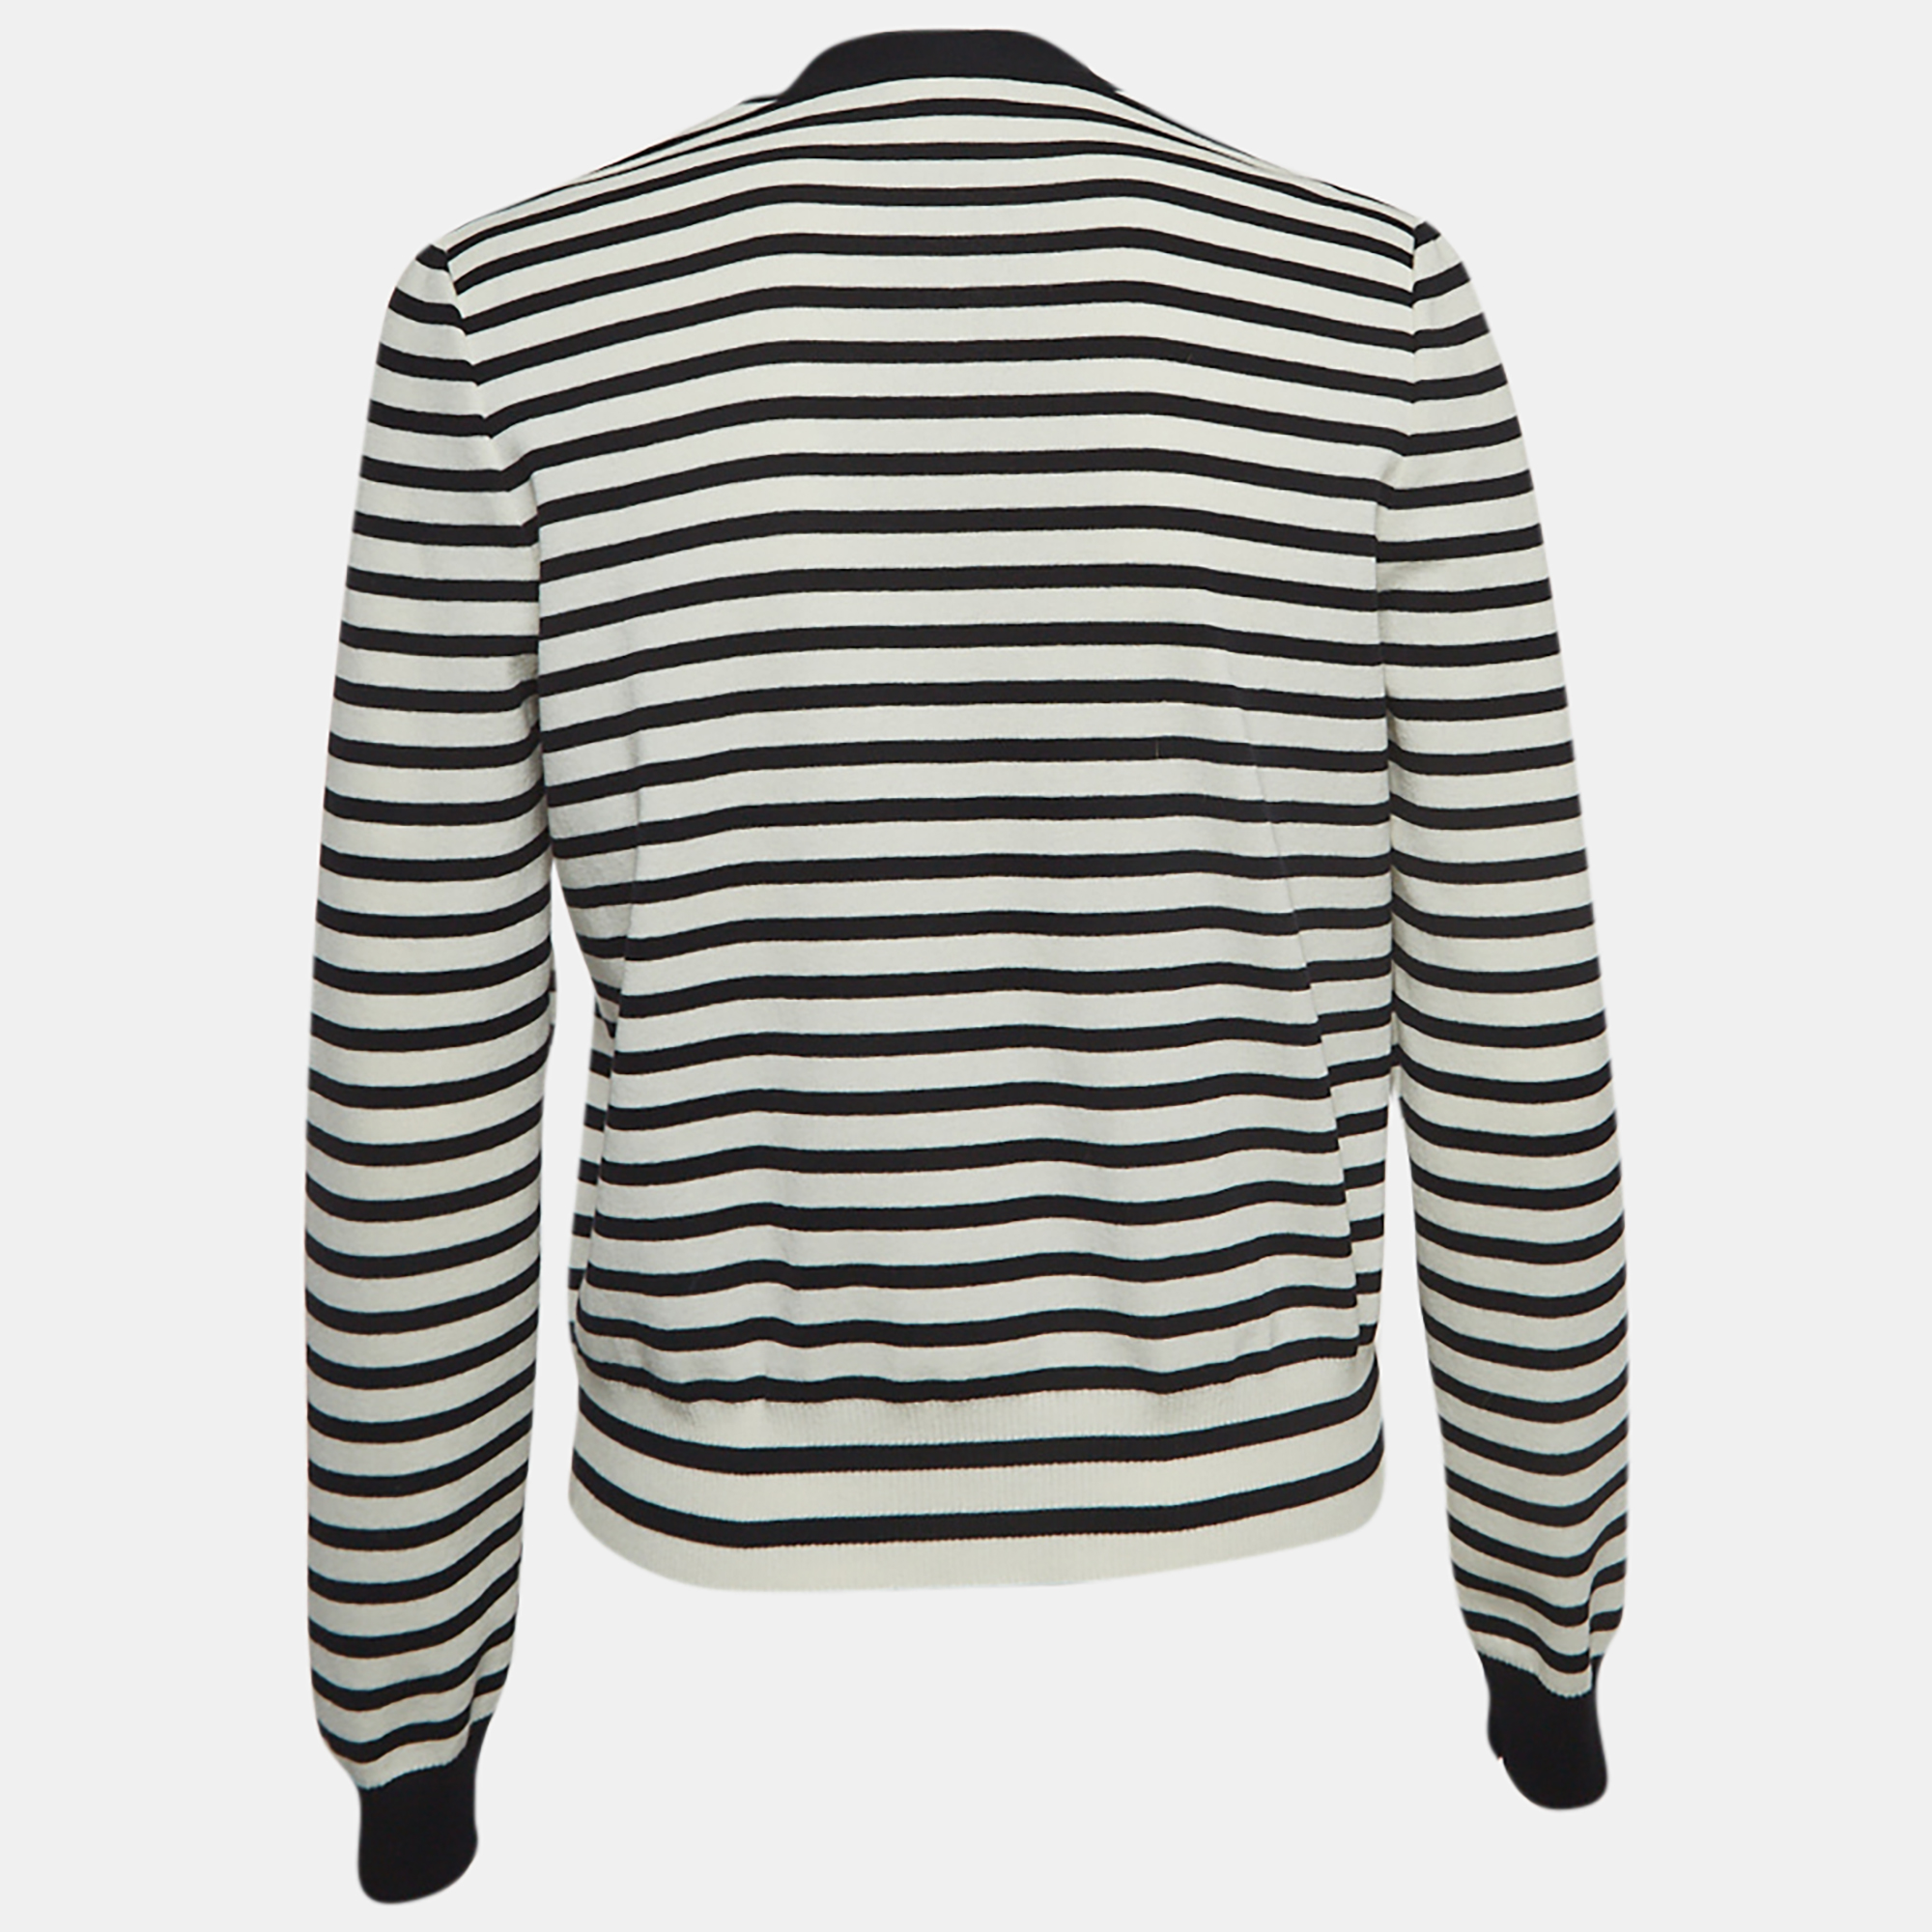 

Chanel Black/White Striped Patterned Knit Cardigan